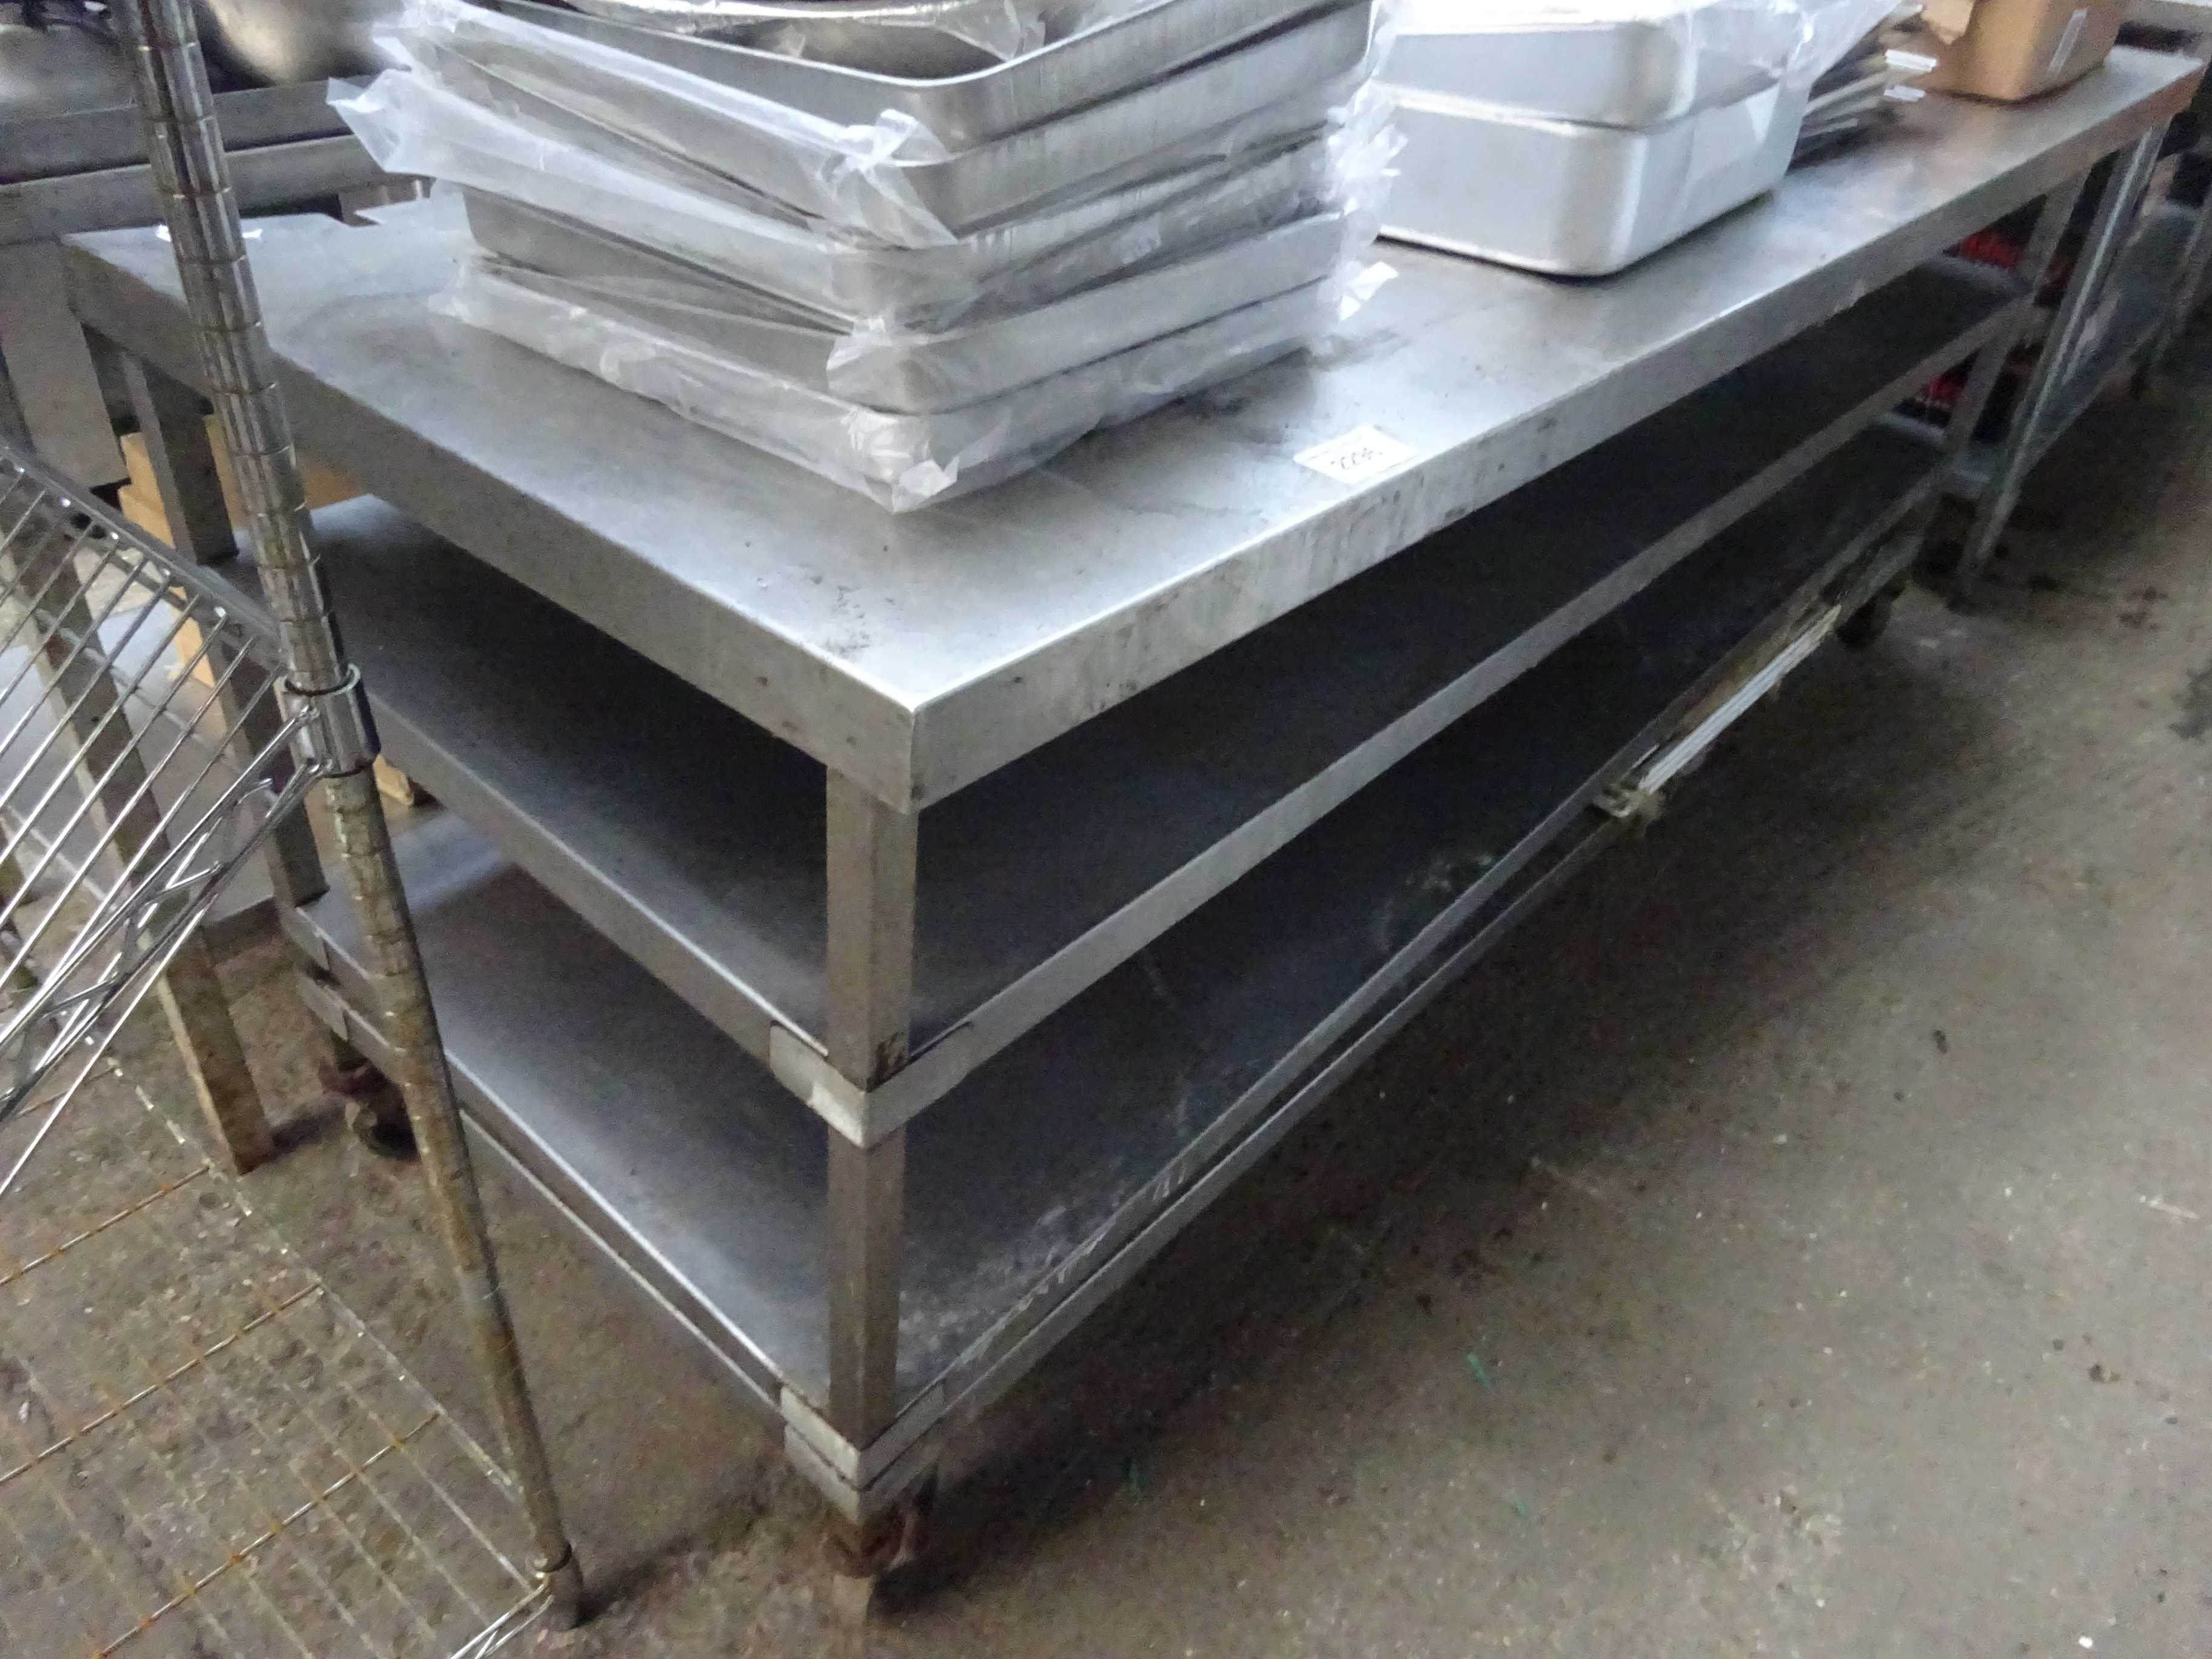 Mobile stainless steel preparation table with three under shelves, 213cms.